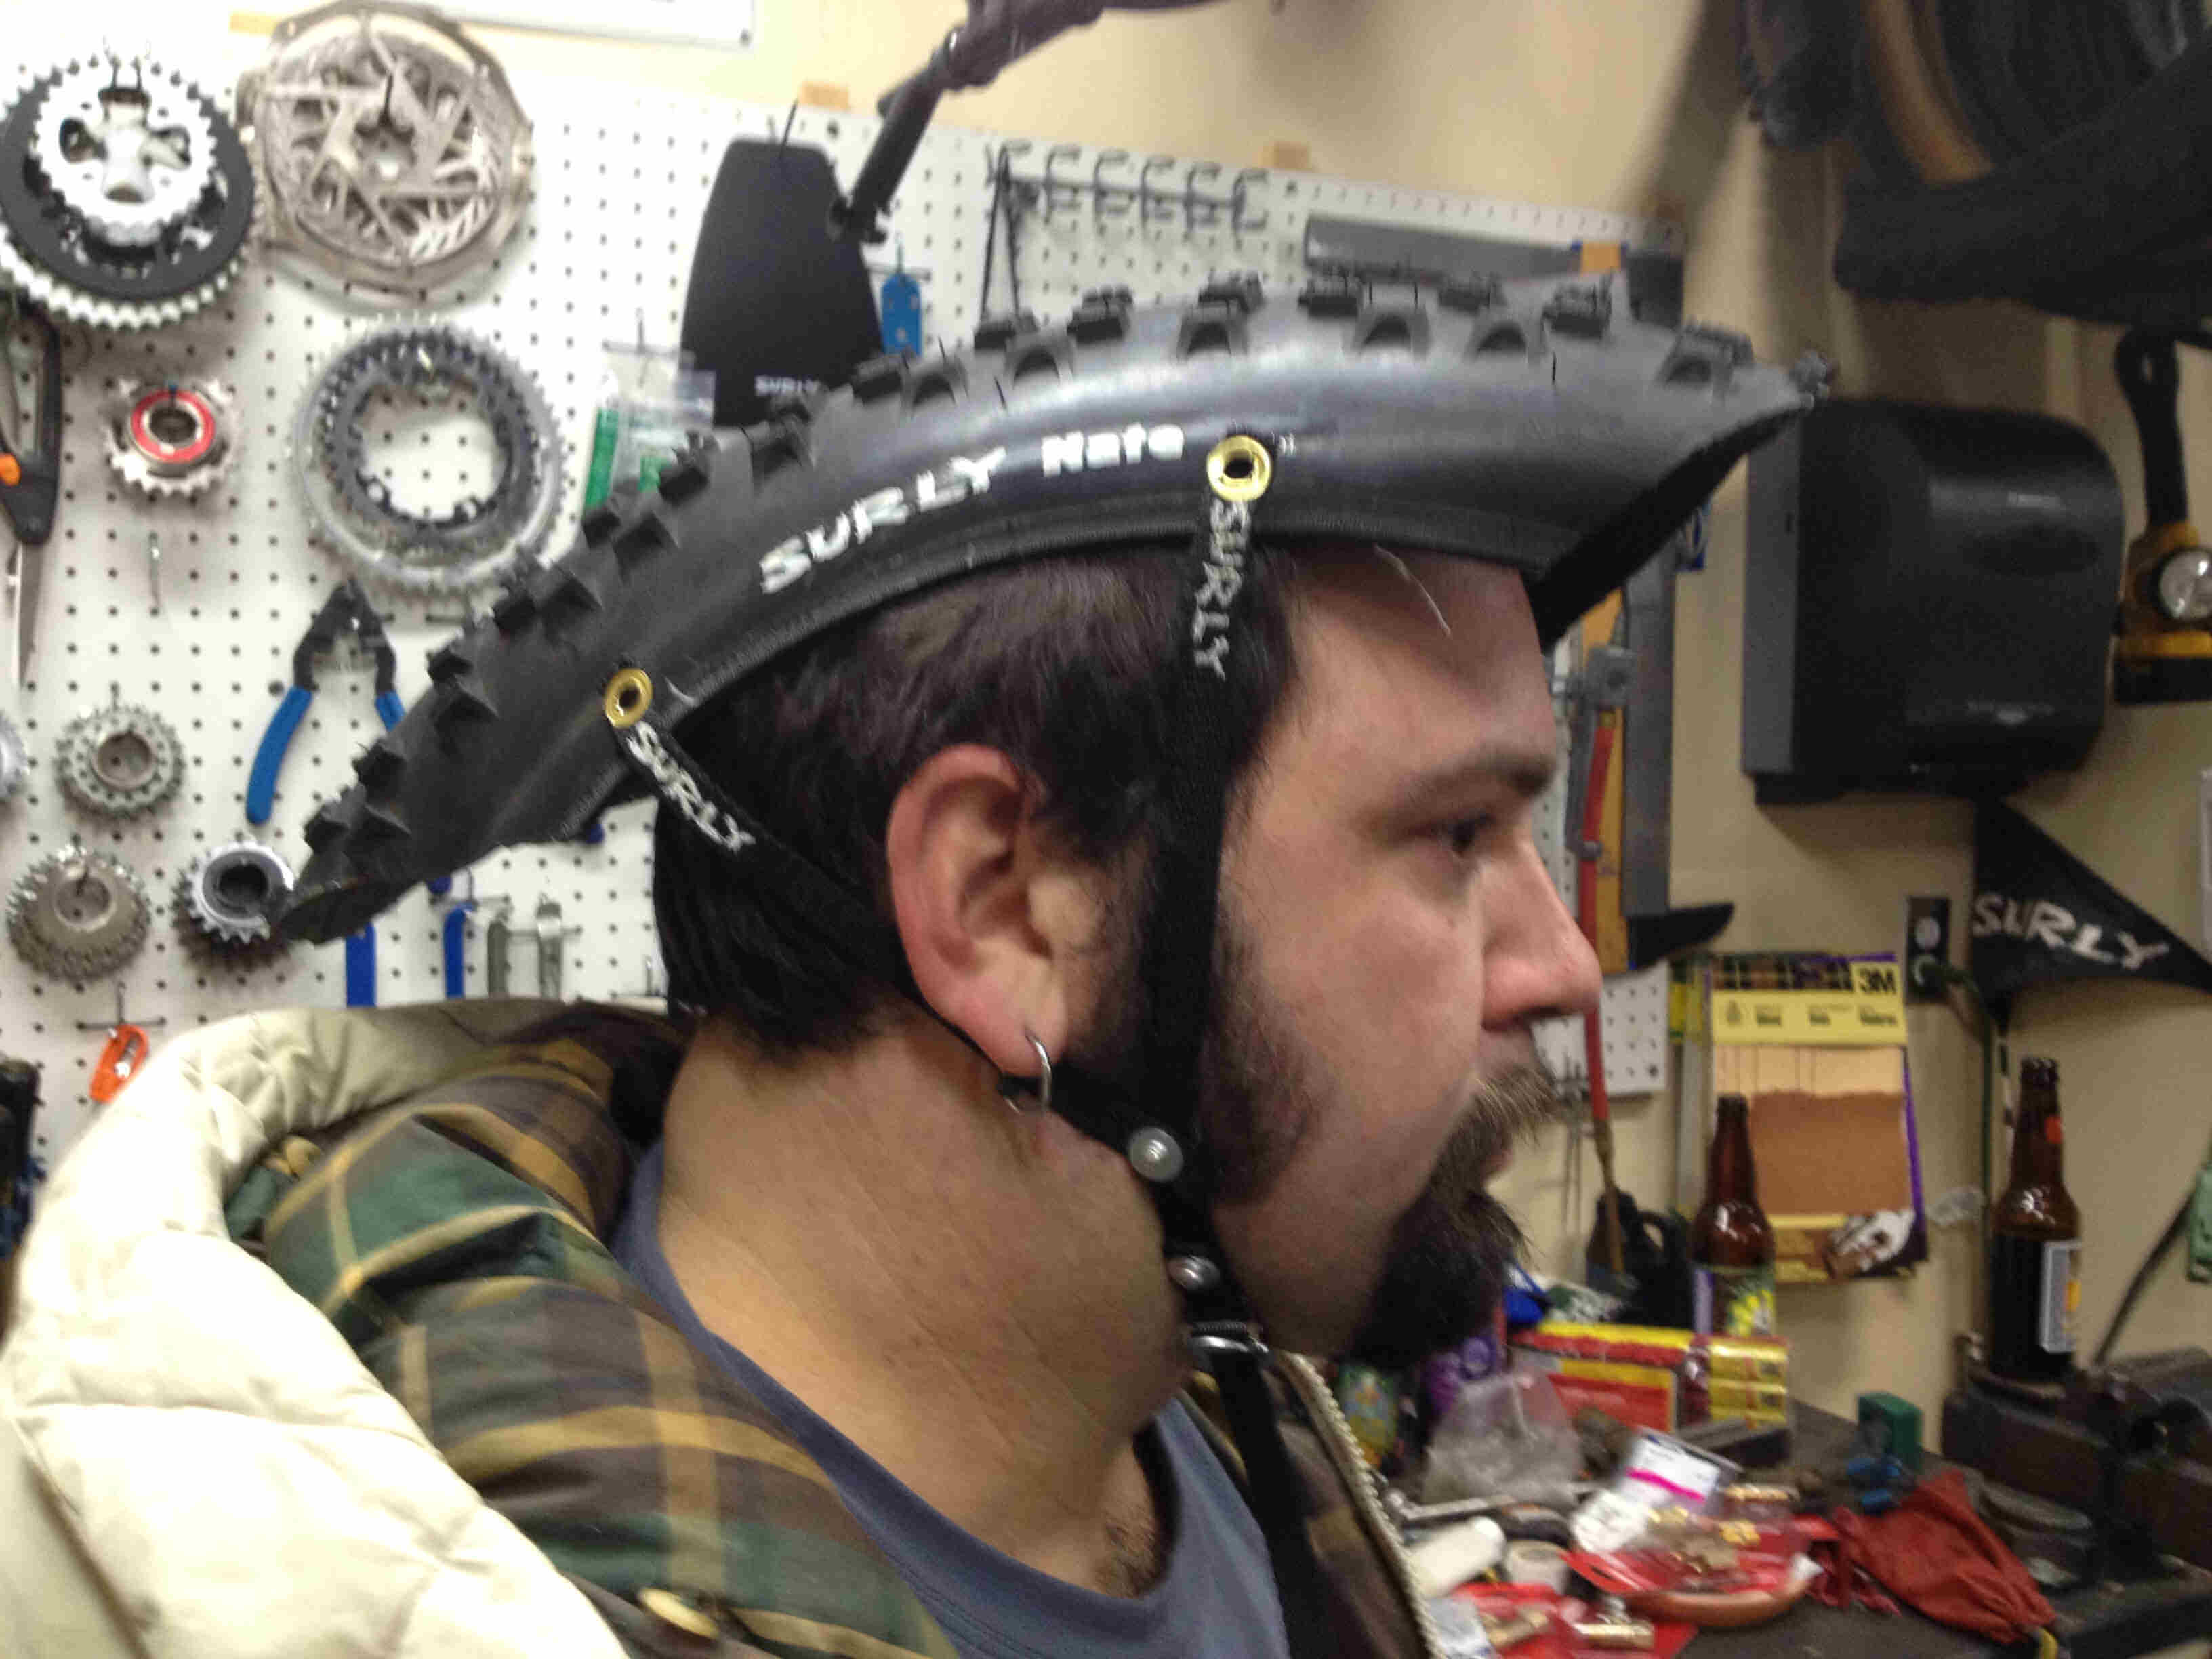 Right side view of a person wearing a helmet made from a cut out of a Surly fat bike tire